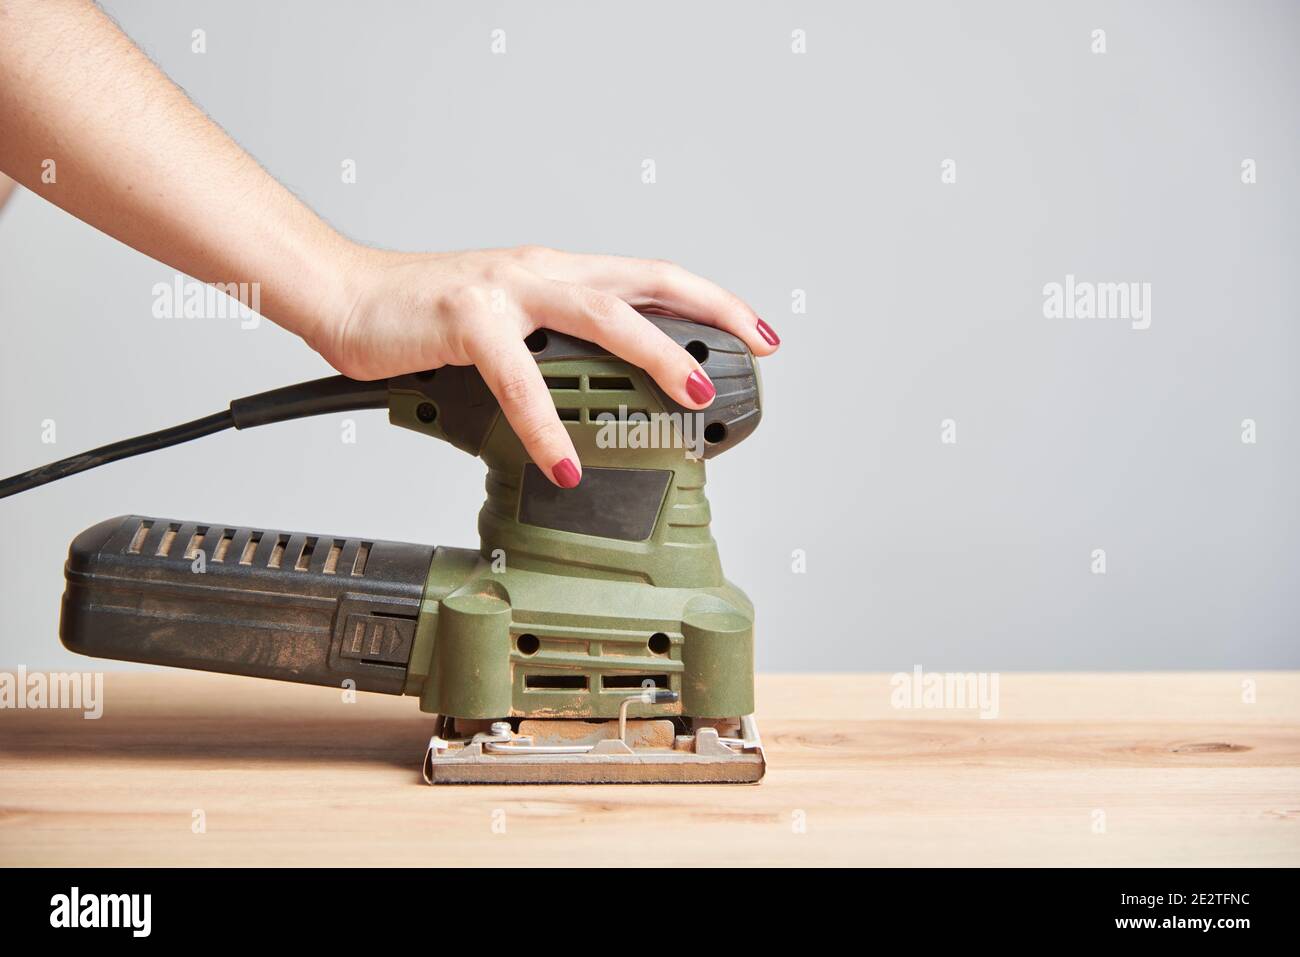 Carpentry work, hand of a young caucasian woman with her nails done sanding wood, using an electric sander. Stock Photo